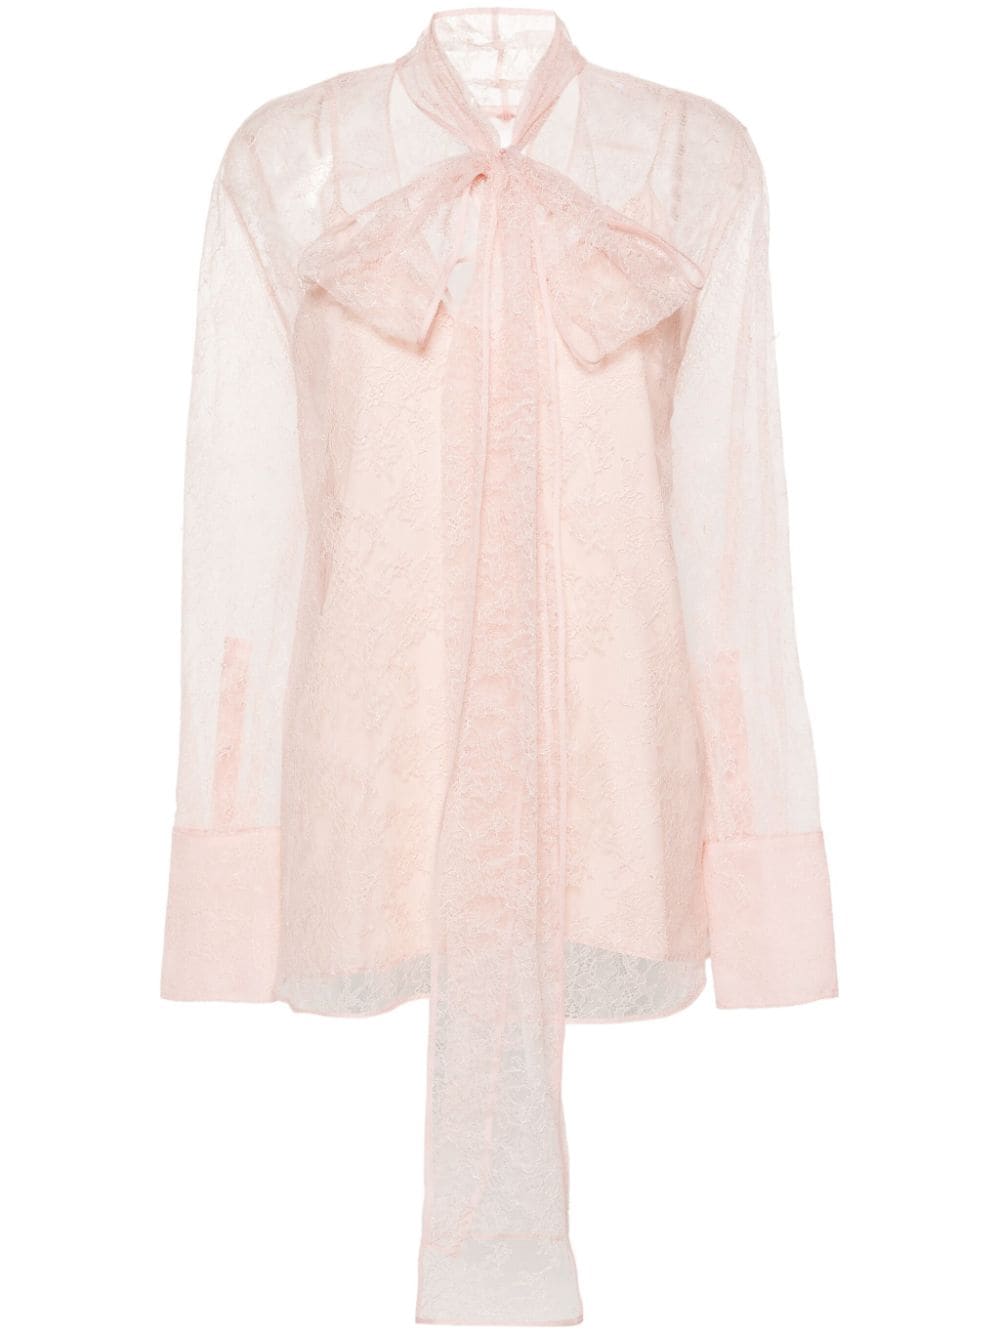 Givenchy Sheer-Bluse aus Spitze - Rosa von Givenchy